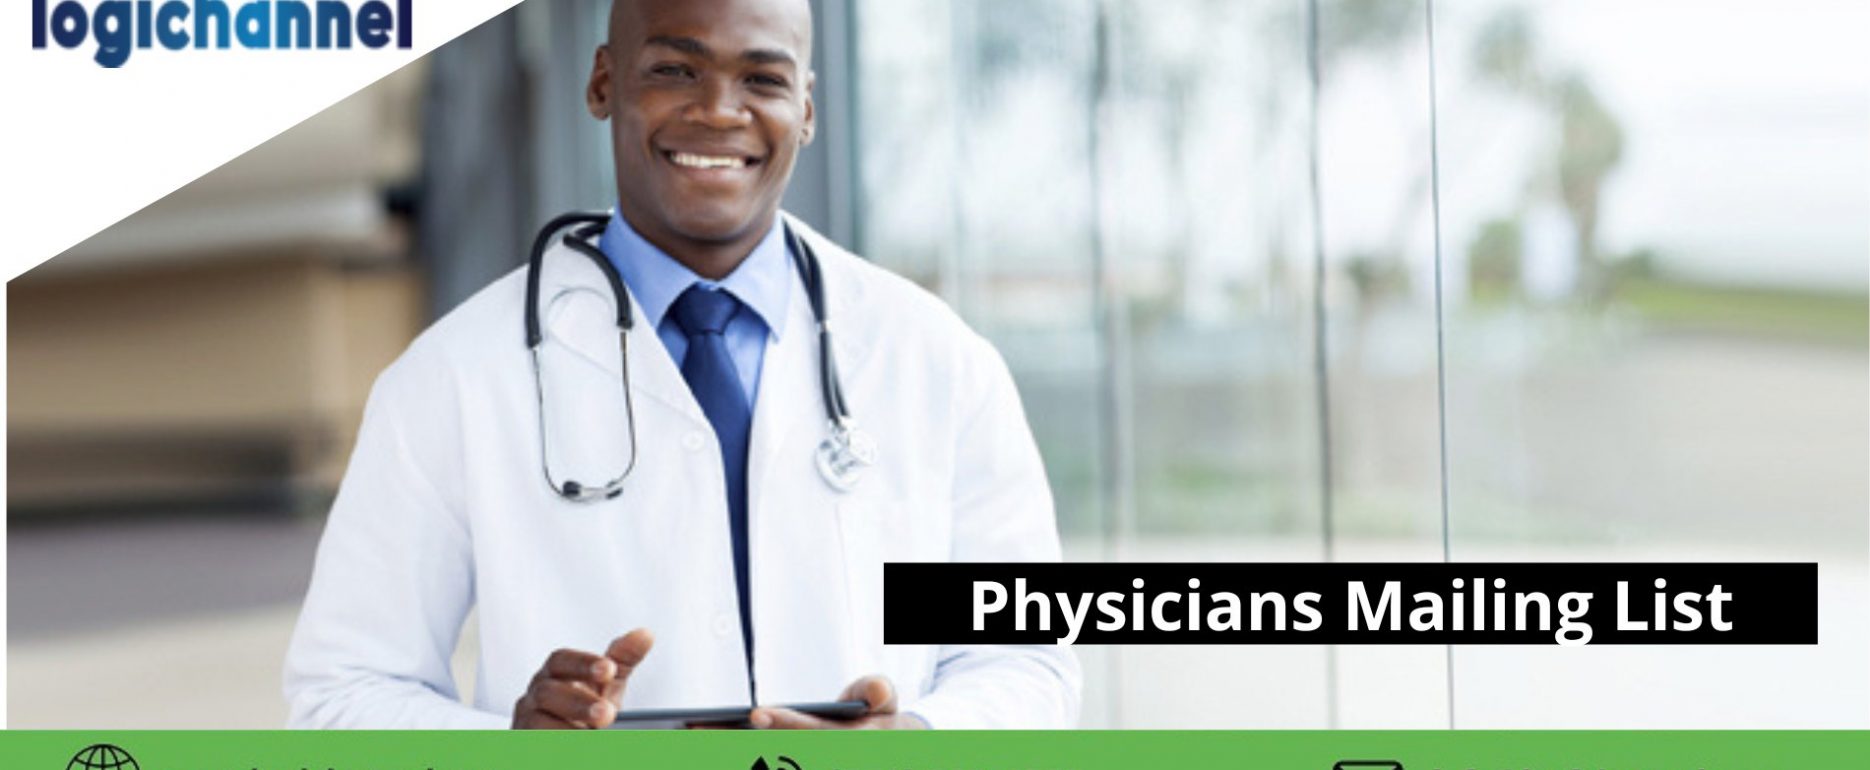 Physicians Email Lists | LogiChannel